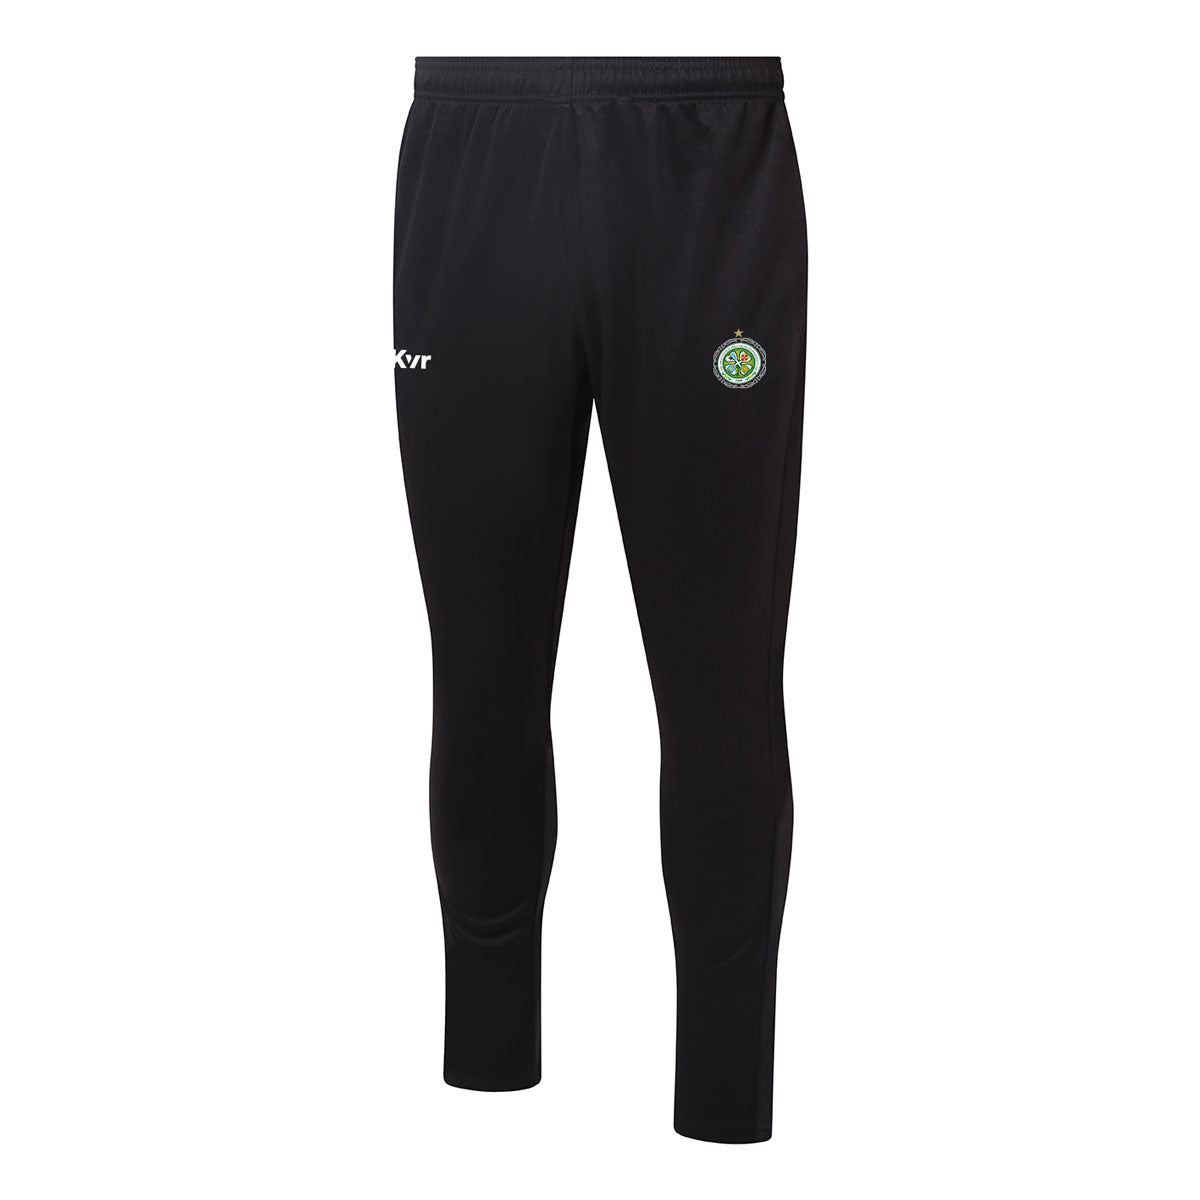 Mc Keever The Association of Irish Celtic Supporters Clubs Core 22 Skinny Pants - Adult - Black